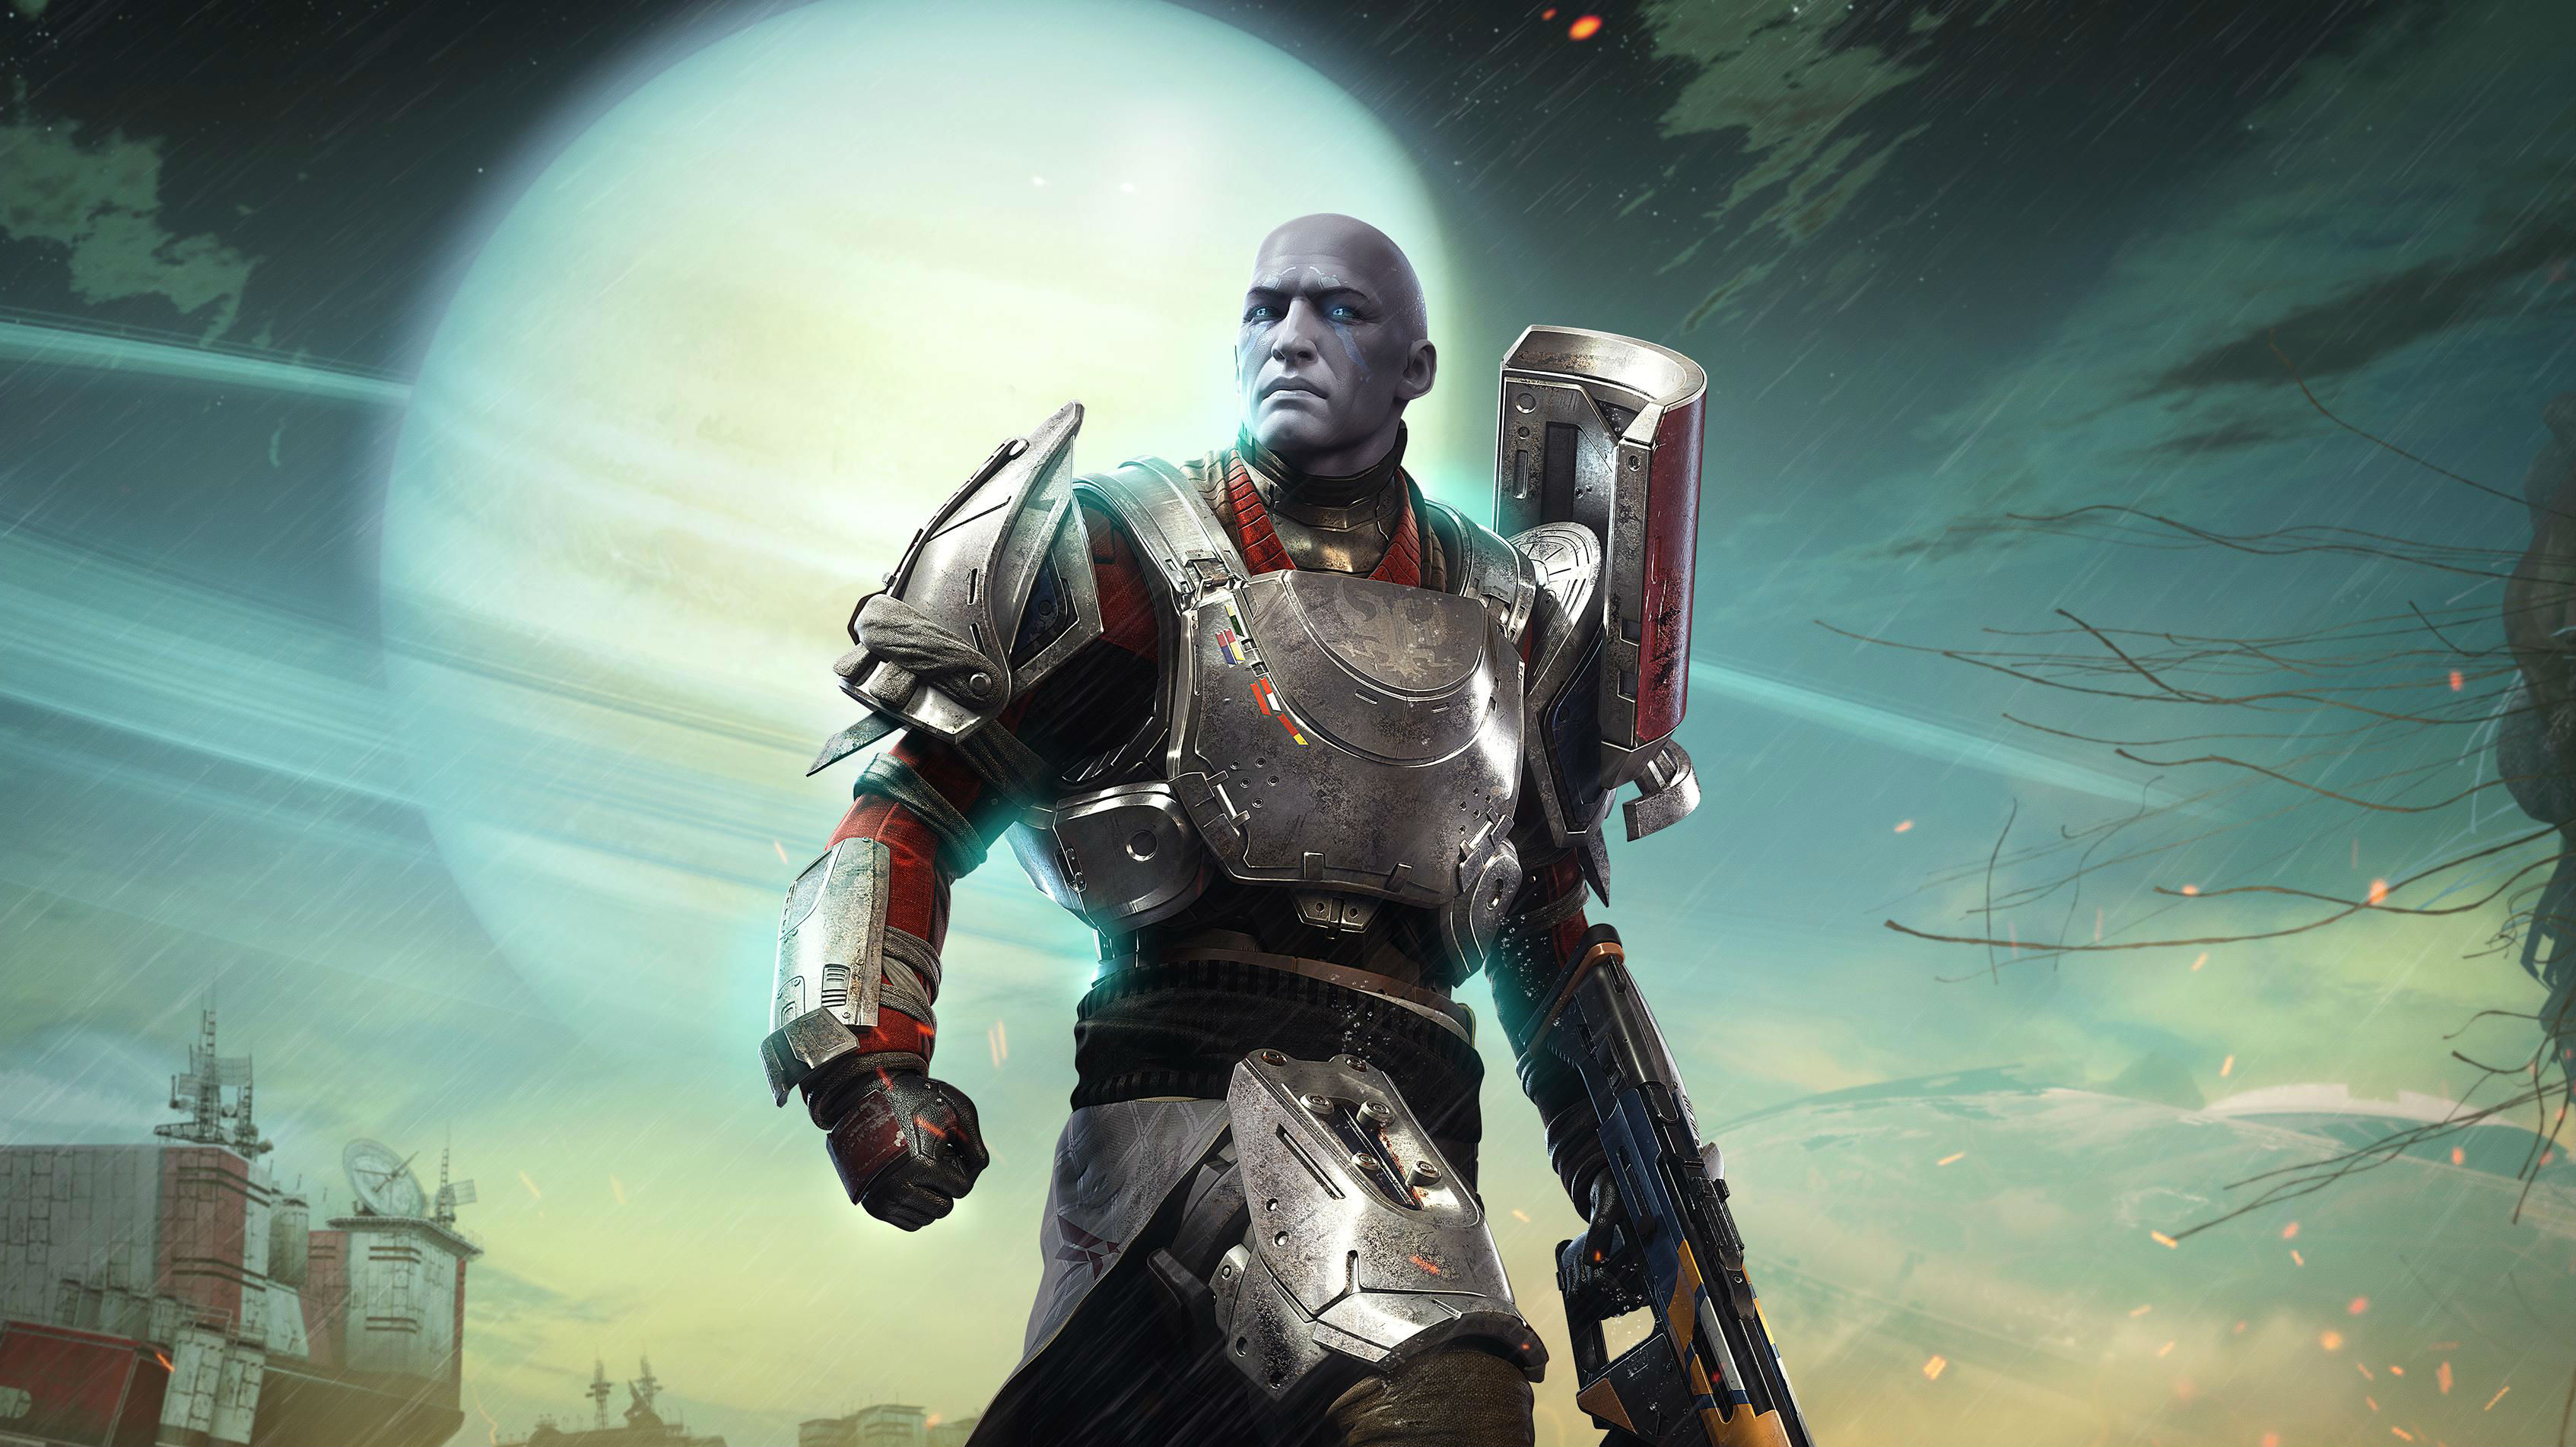 Why Destiny 2 players got so angry and how Bungie plans to make them happy again